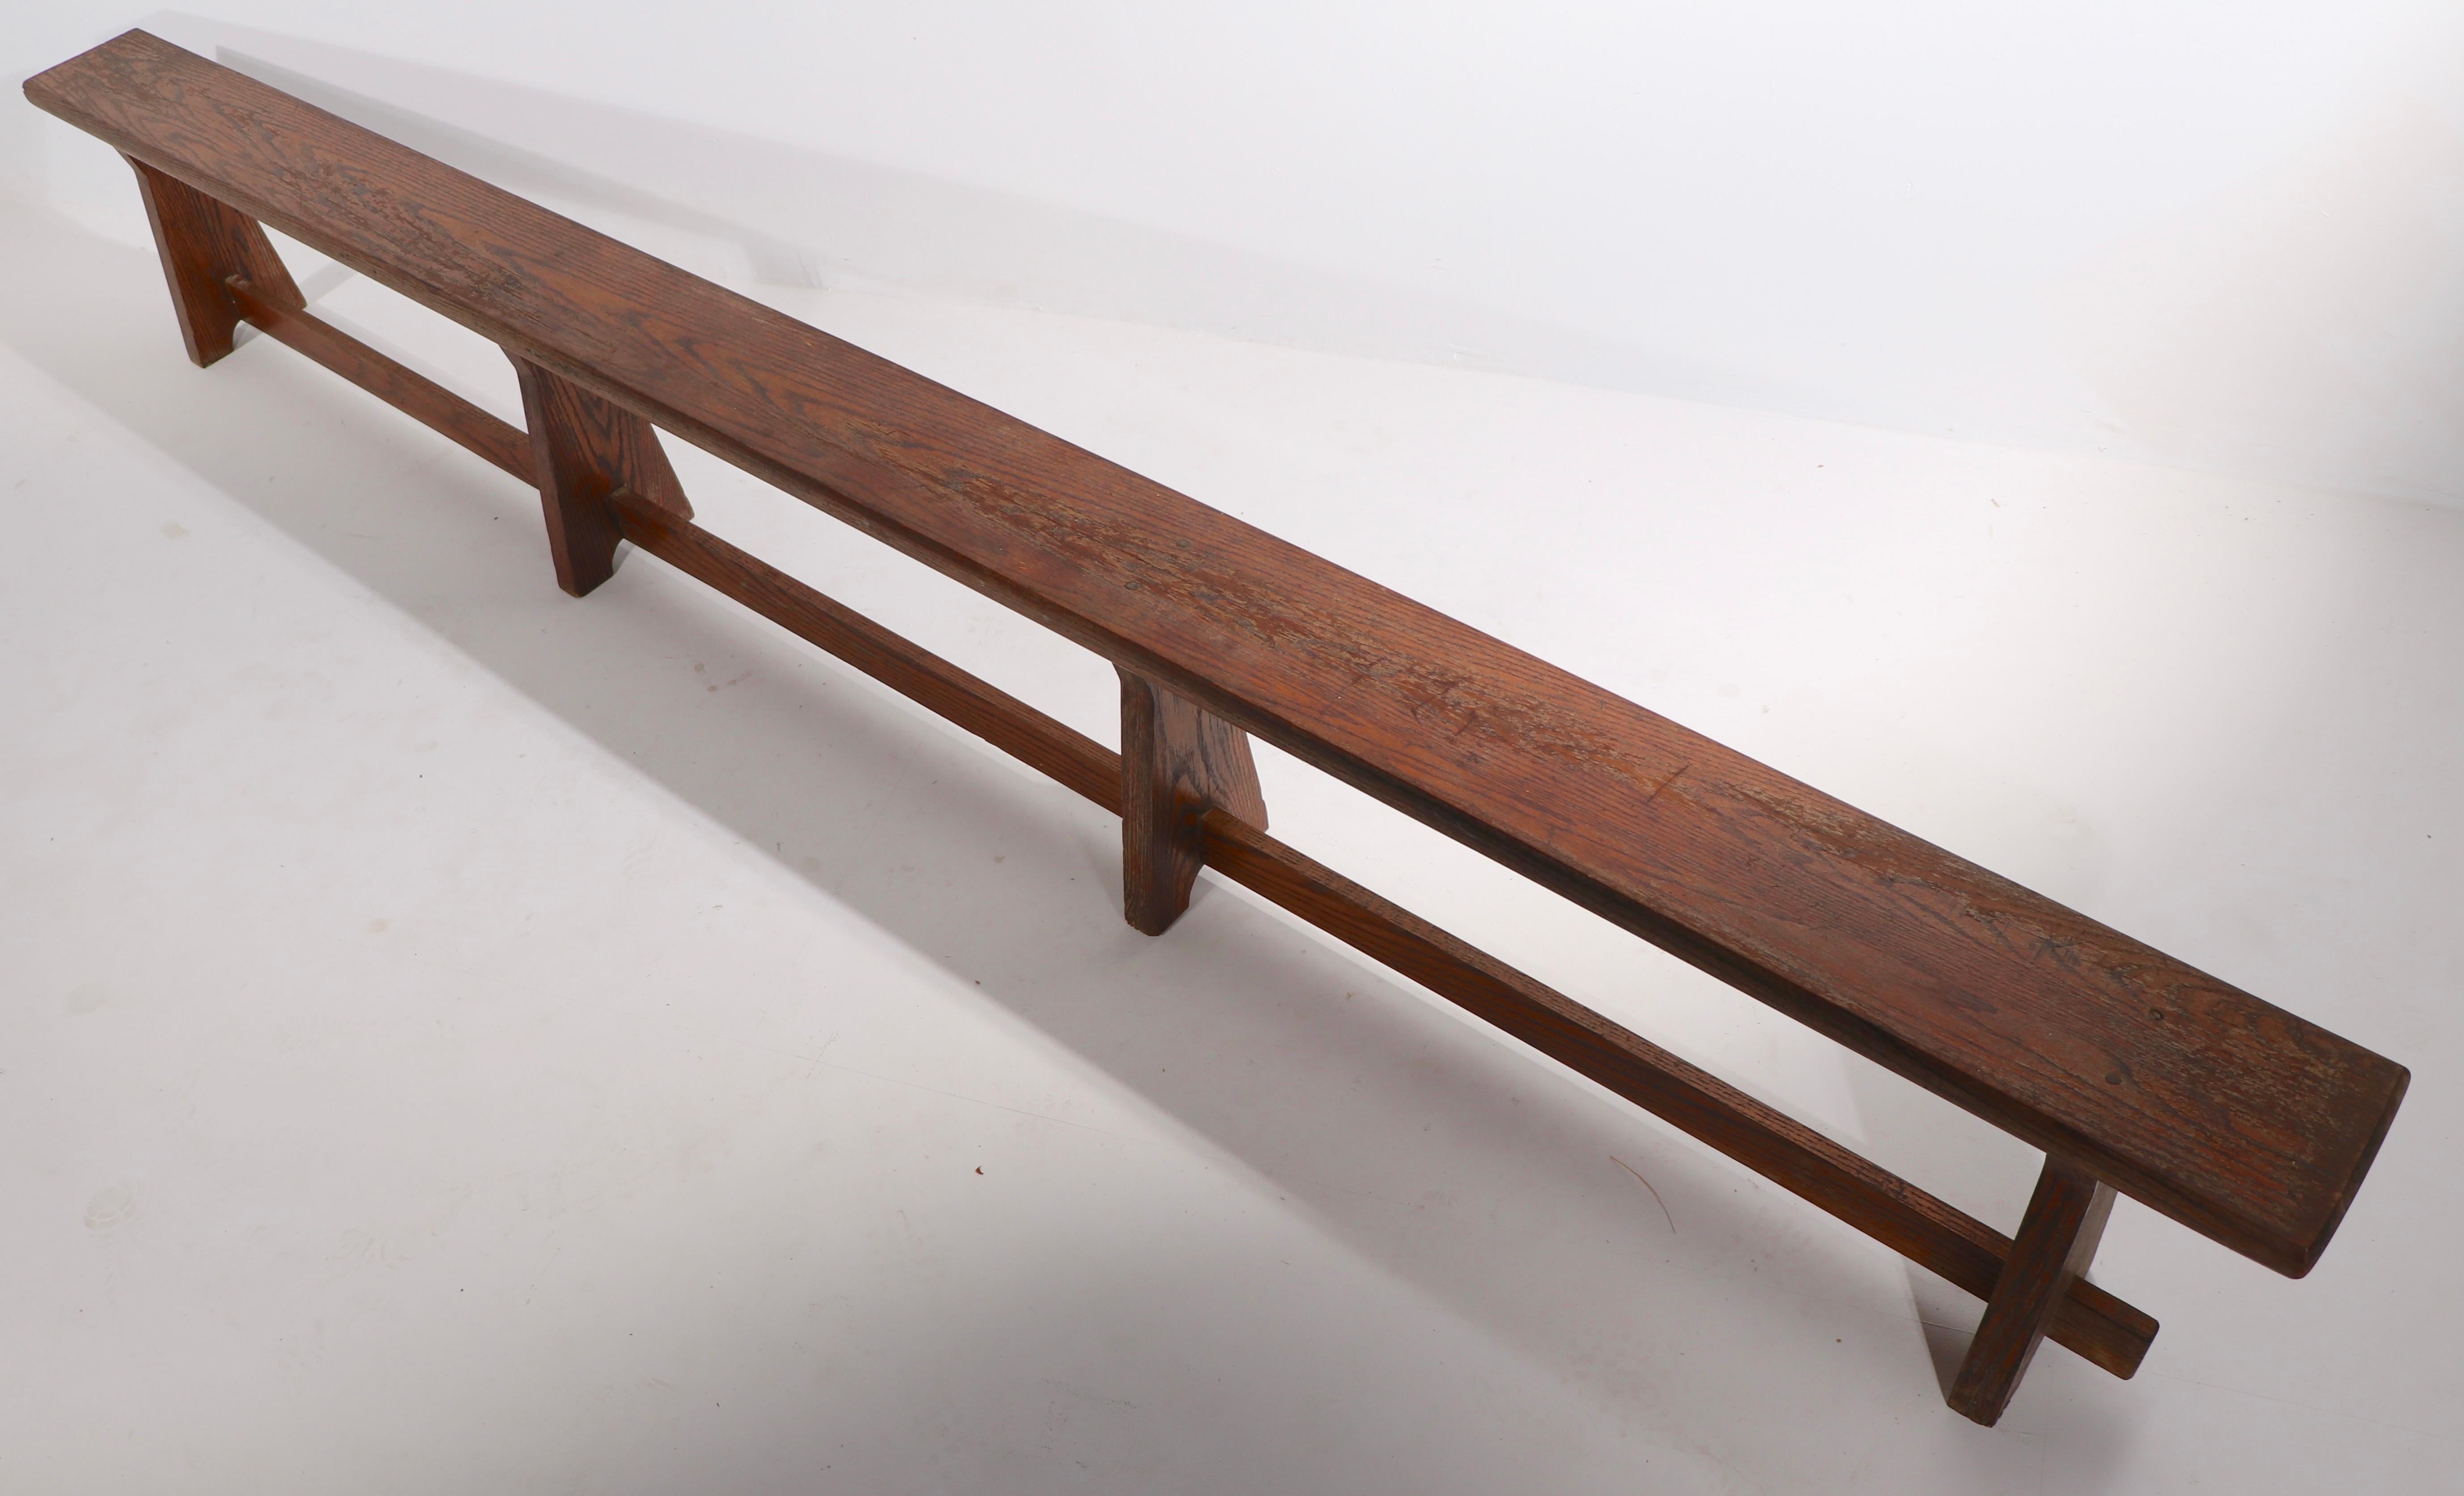 Rustic Adirondack Arts and Crafts Style Benches 1